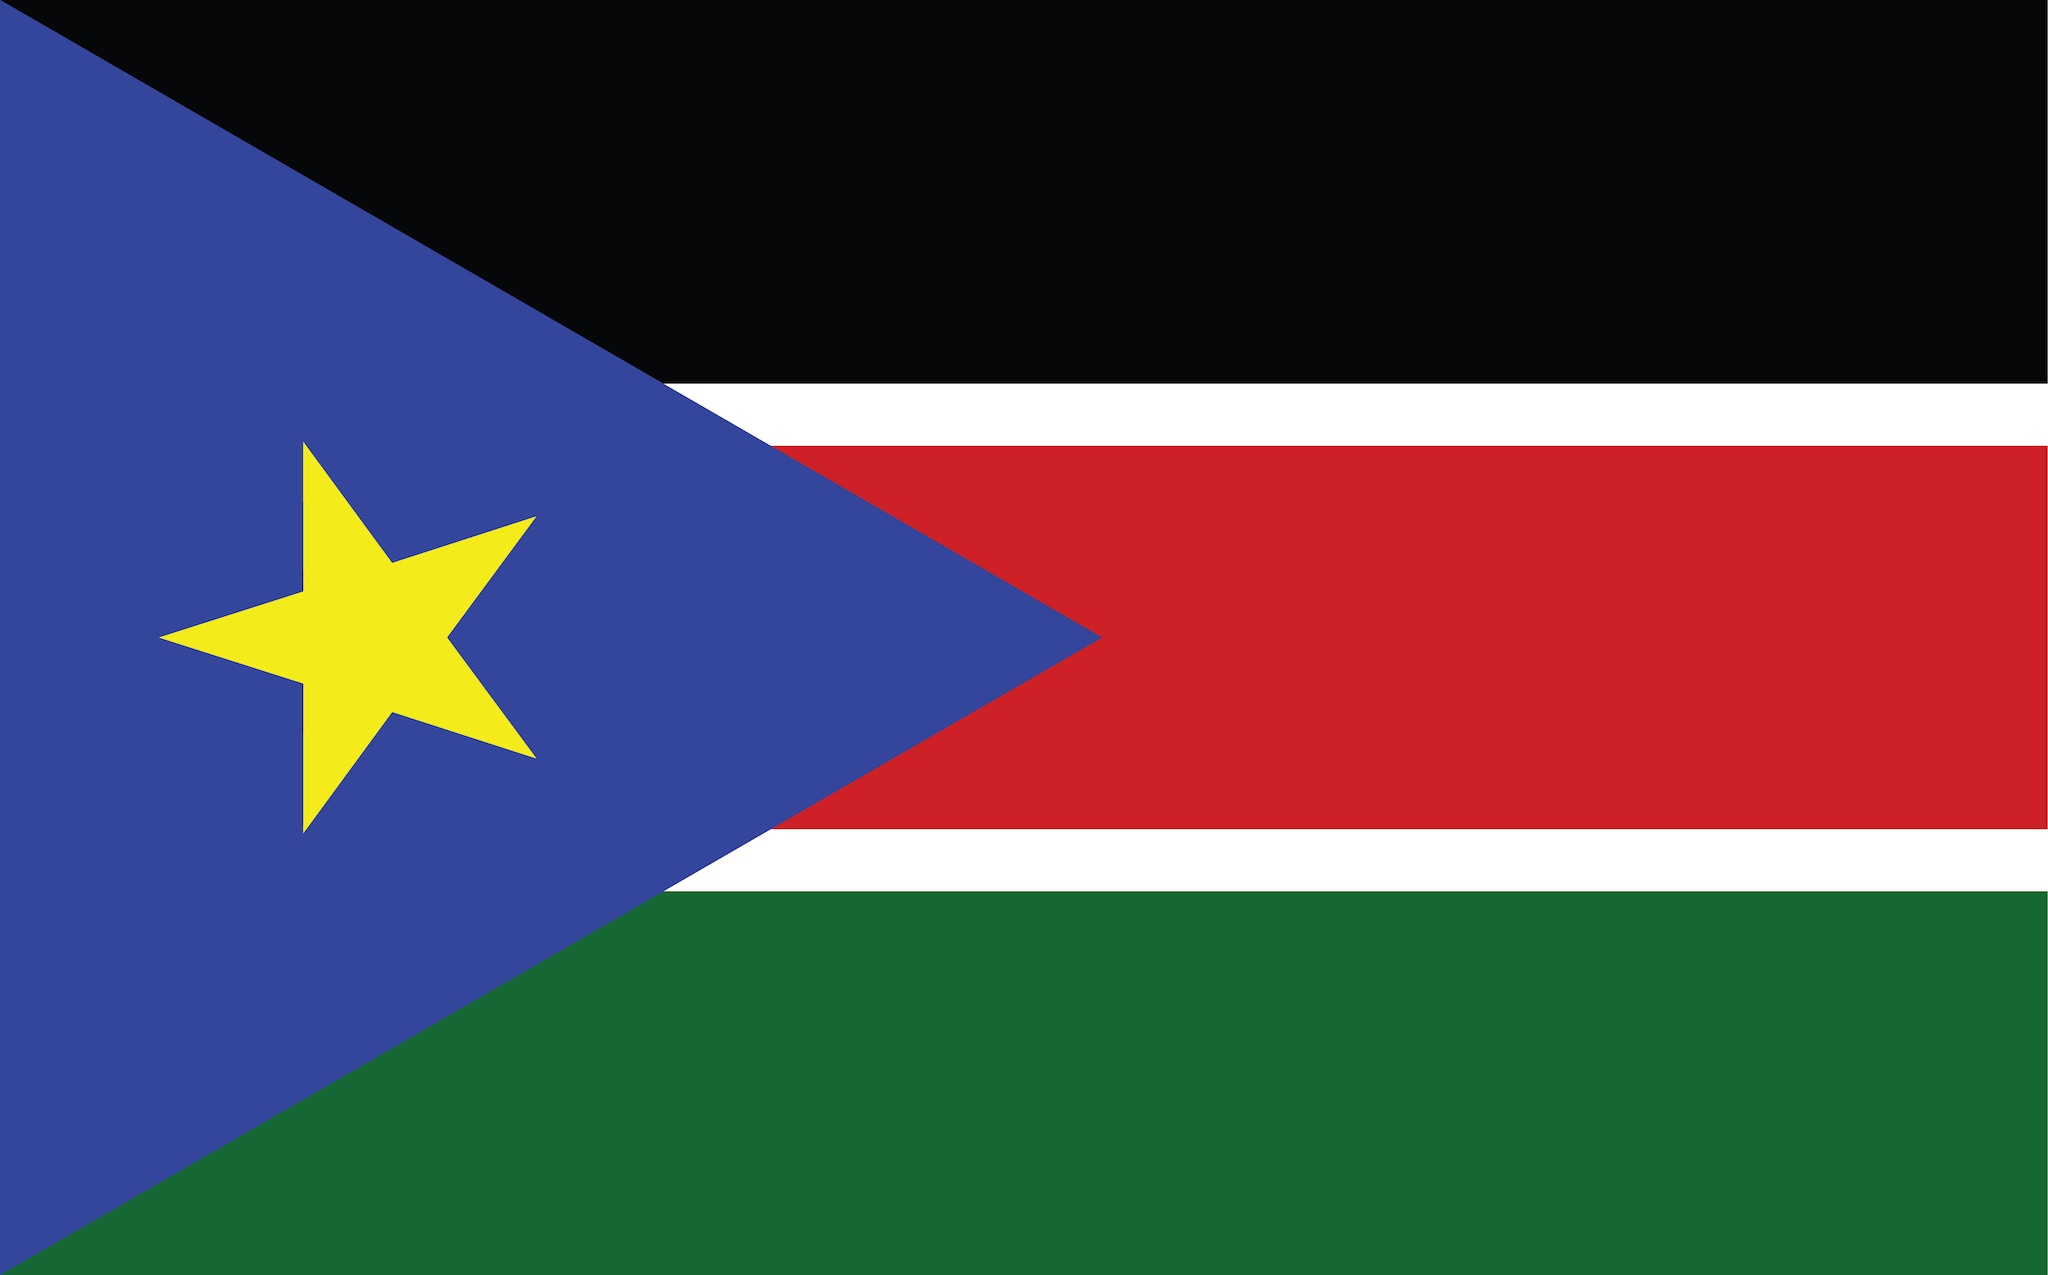 South Sudan flag. Three horizontal bands of black, red, and green. The red band is edged in white. A blue triangle based on the hoist side contains a gold, five-pointed star.